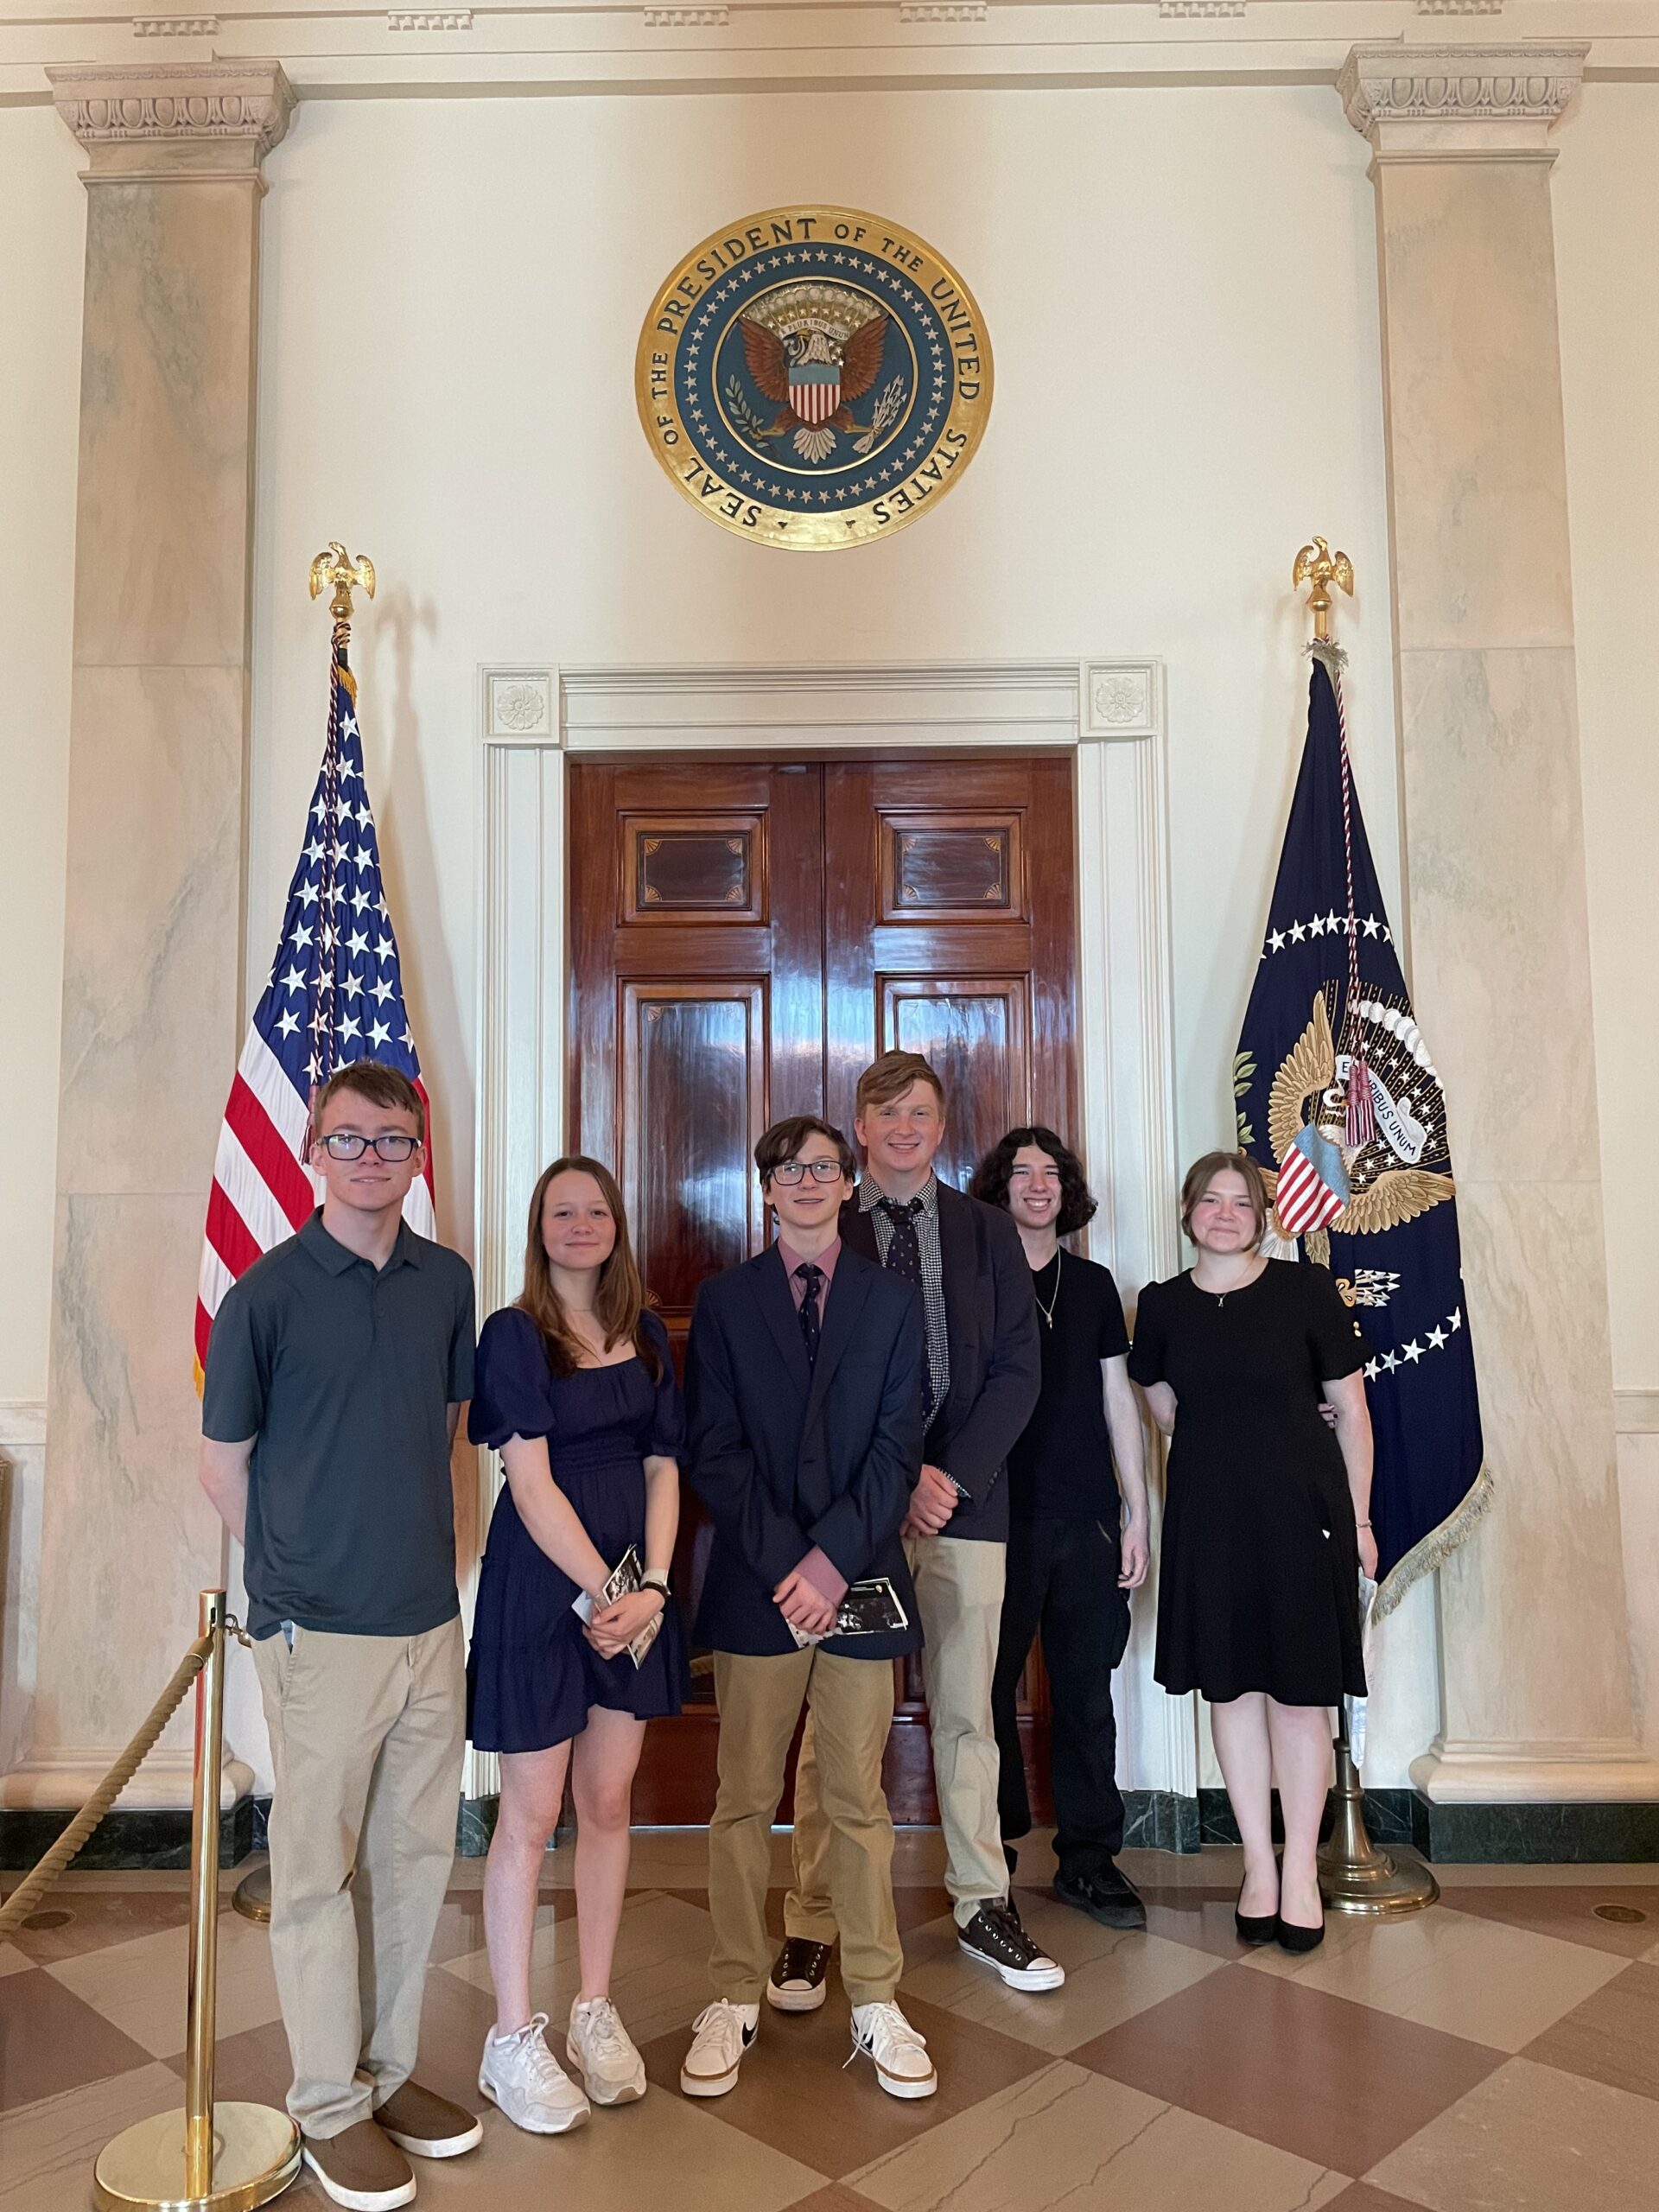 Picture of the members of the Band of Brats club at the White House